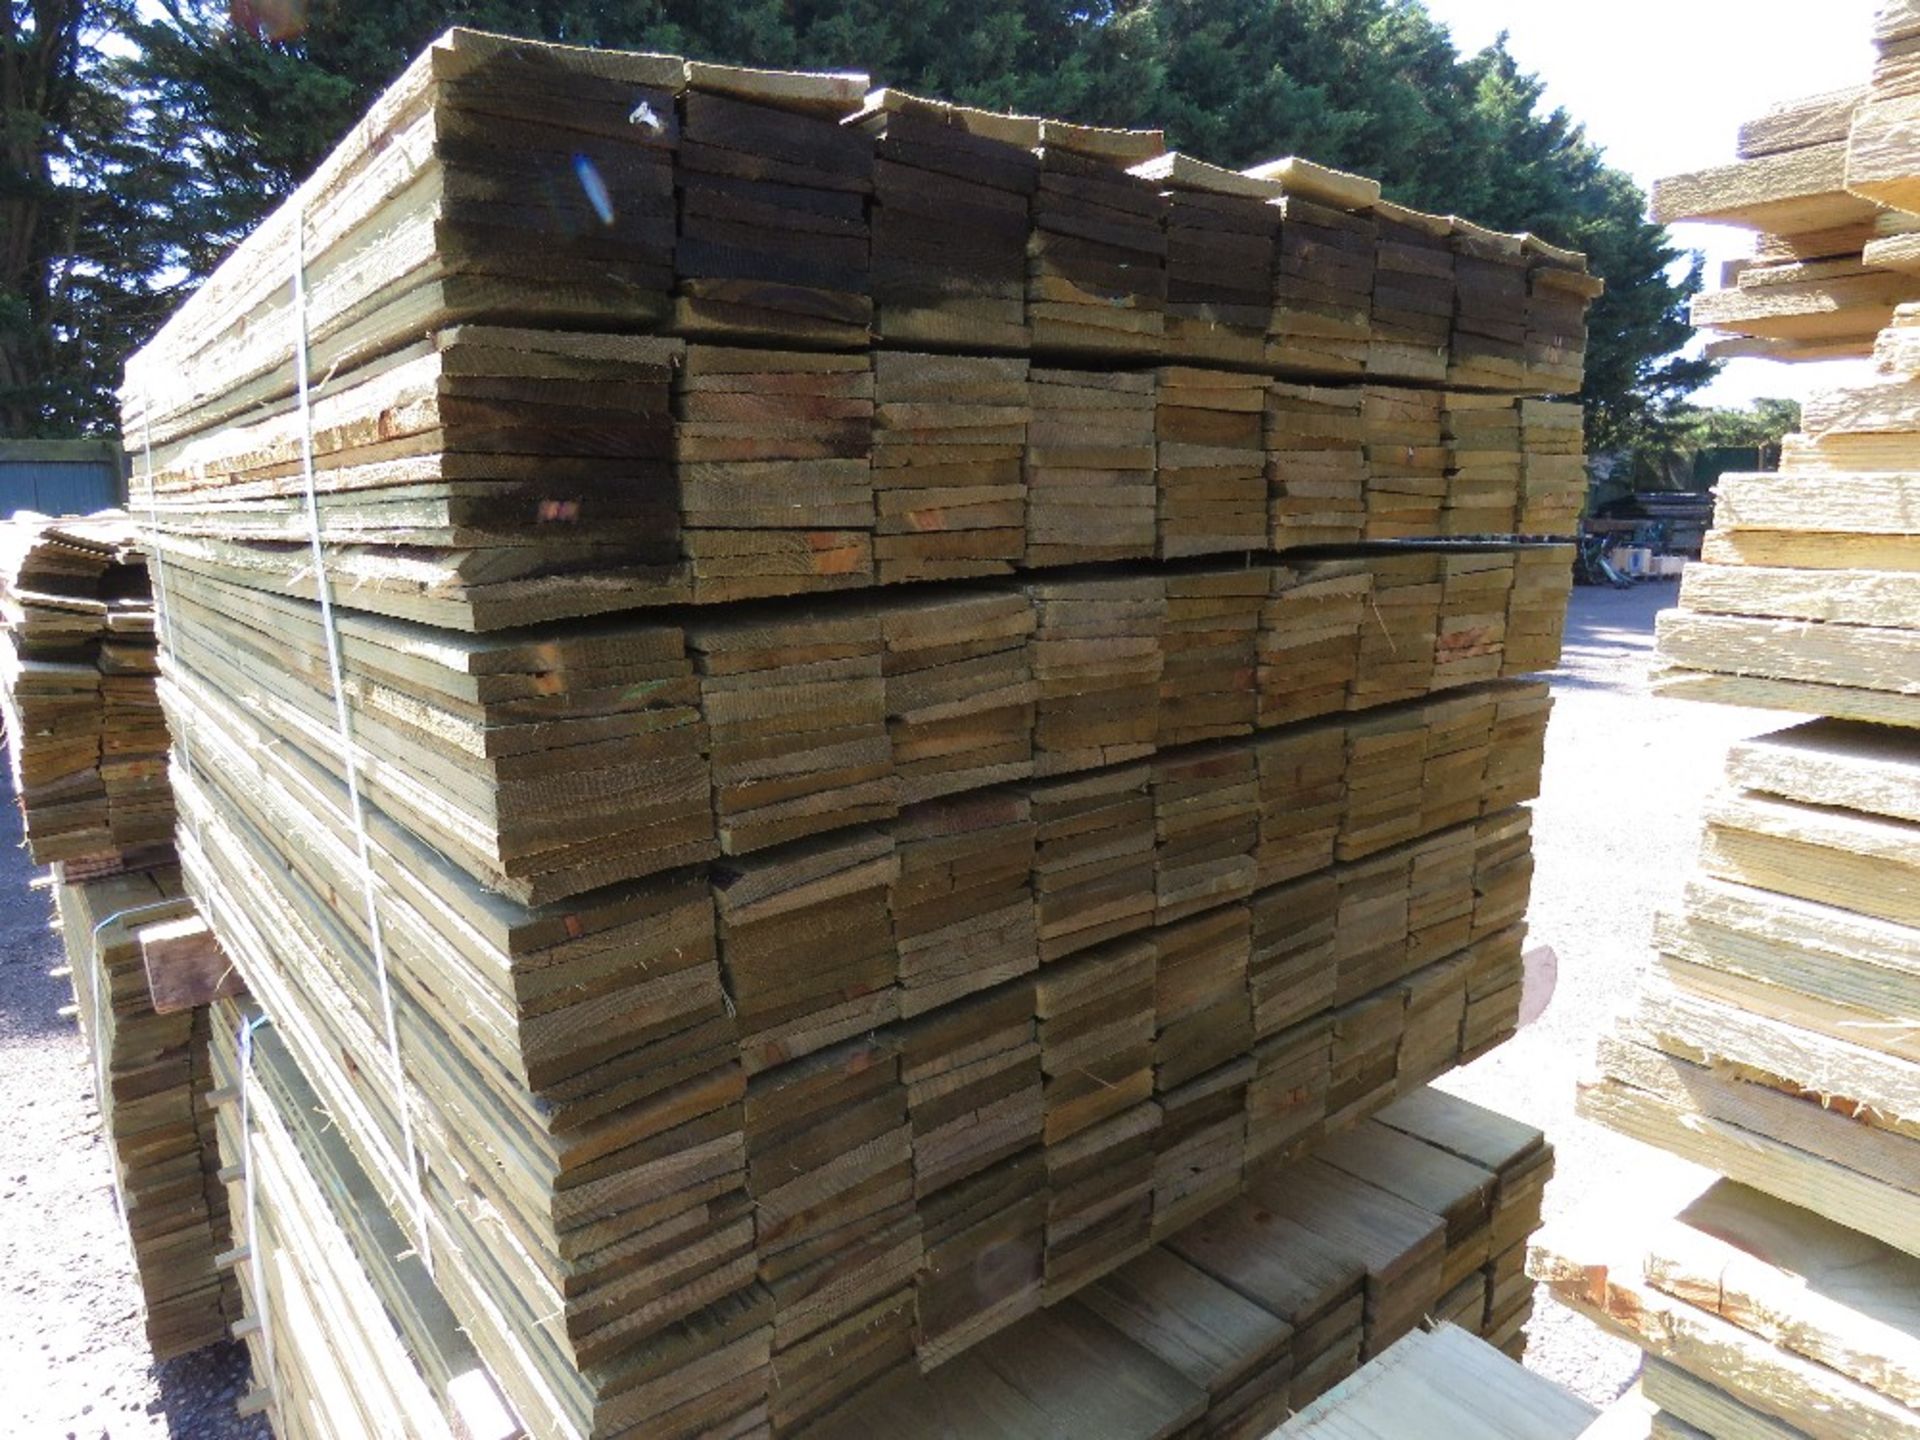 LARGE PACK OF PRESSURE TREATED FEATHER EDGE CLADDING TIMBER BOARDS 1.5M LENGTH X 100MM WIDTH APPROX. - Image 2 of 3